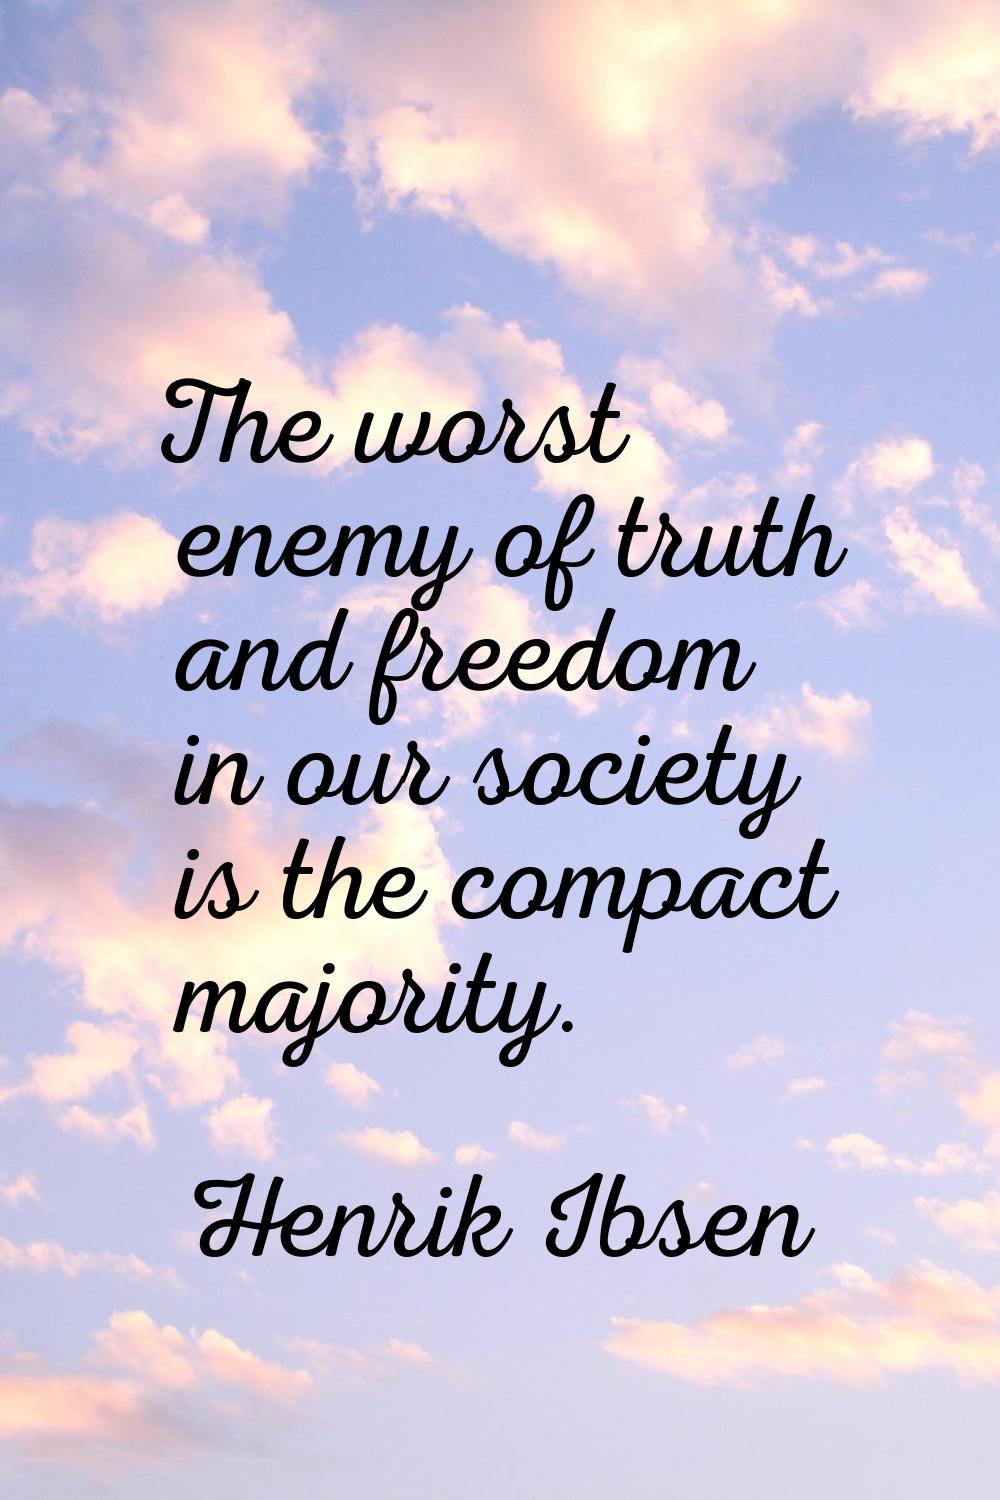 The worst enemy of truth and freedom in our society is the compact majority.